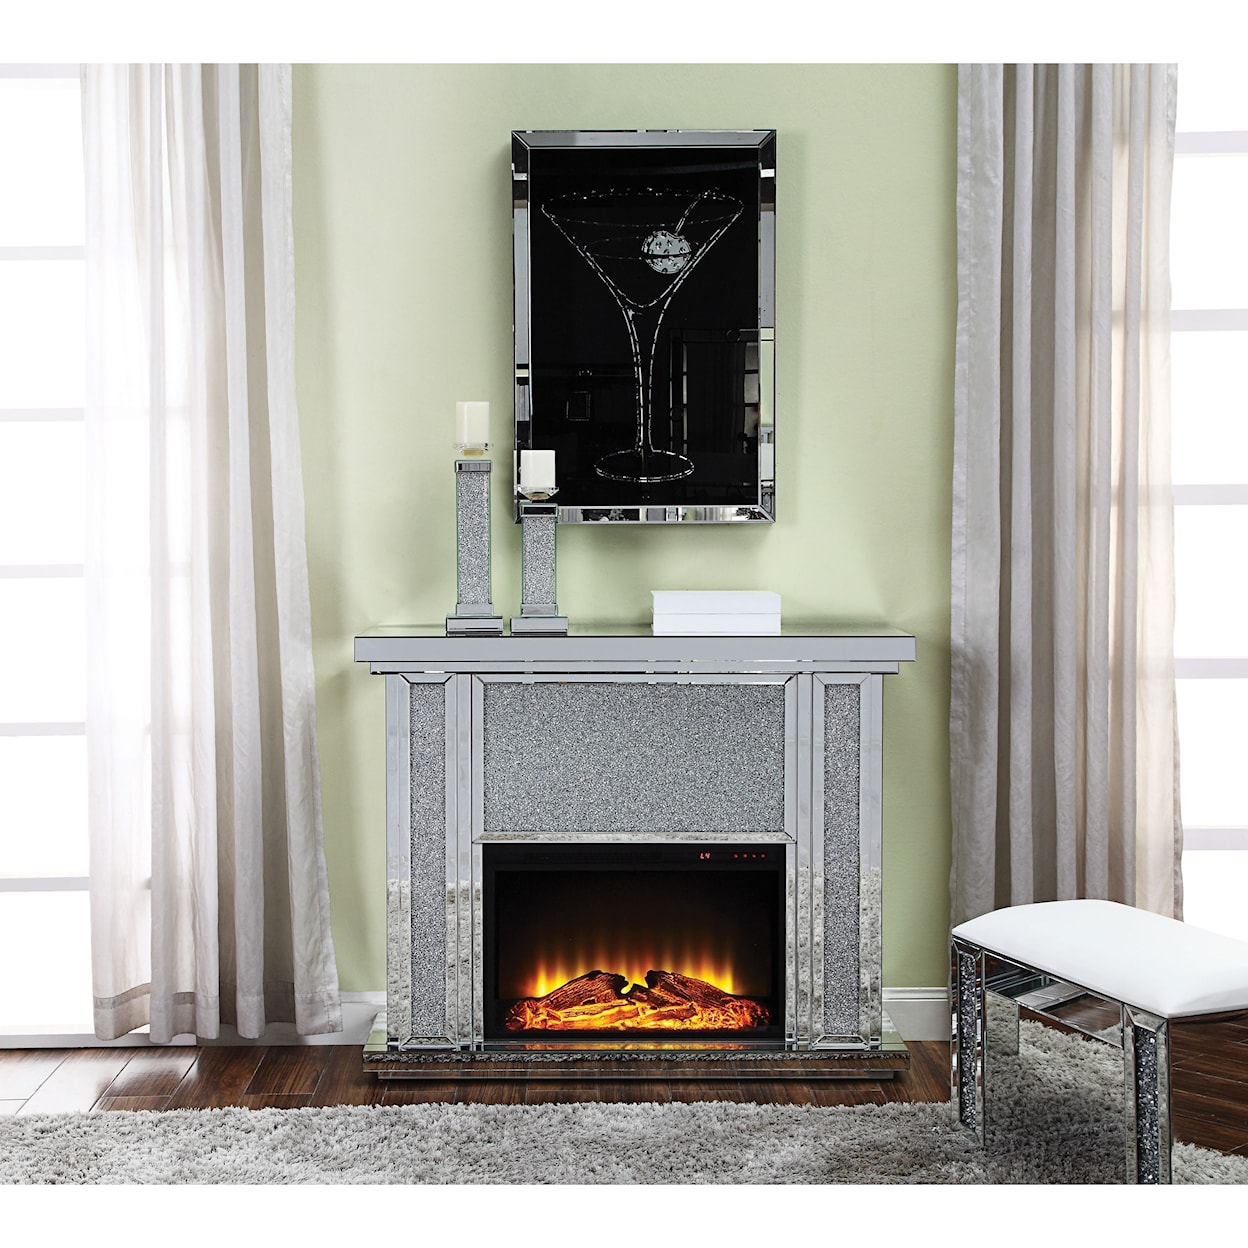 Acme Furniture Nowles Fireplace